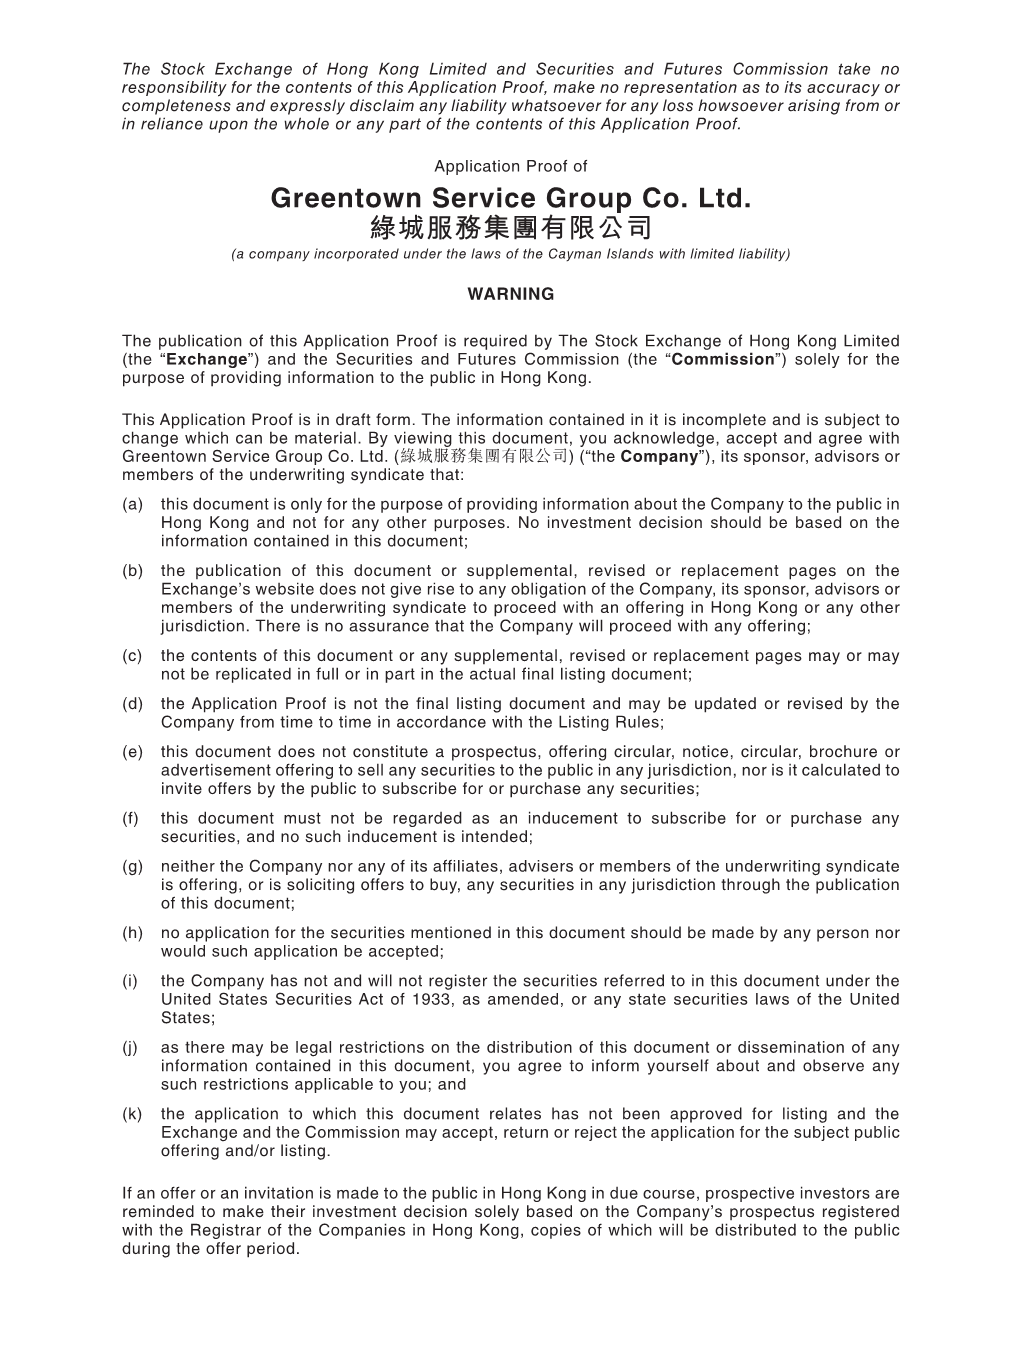 Greentown Service Group Co. Ltd. 綠城服務集團有限公司 (A Company Incorporated Under the Laws of the Cayman Islands with Limited Liability)